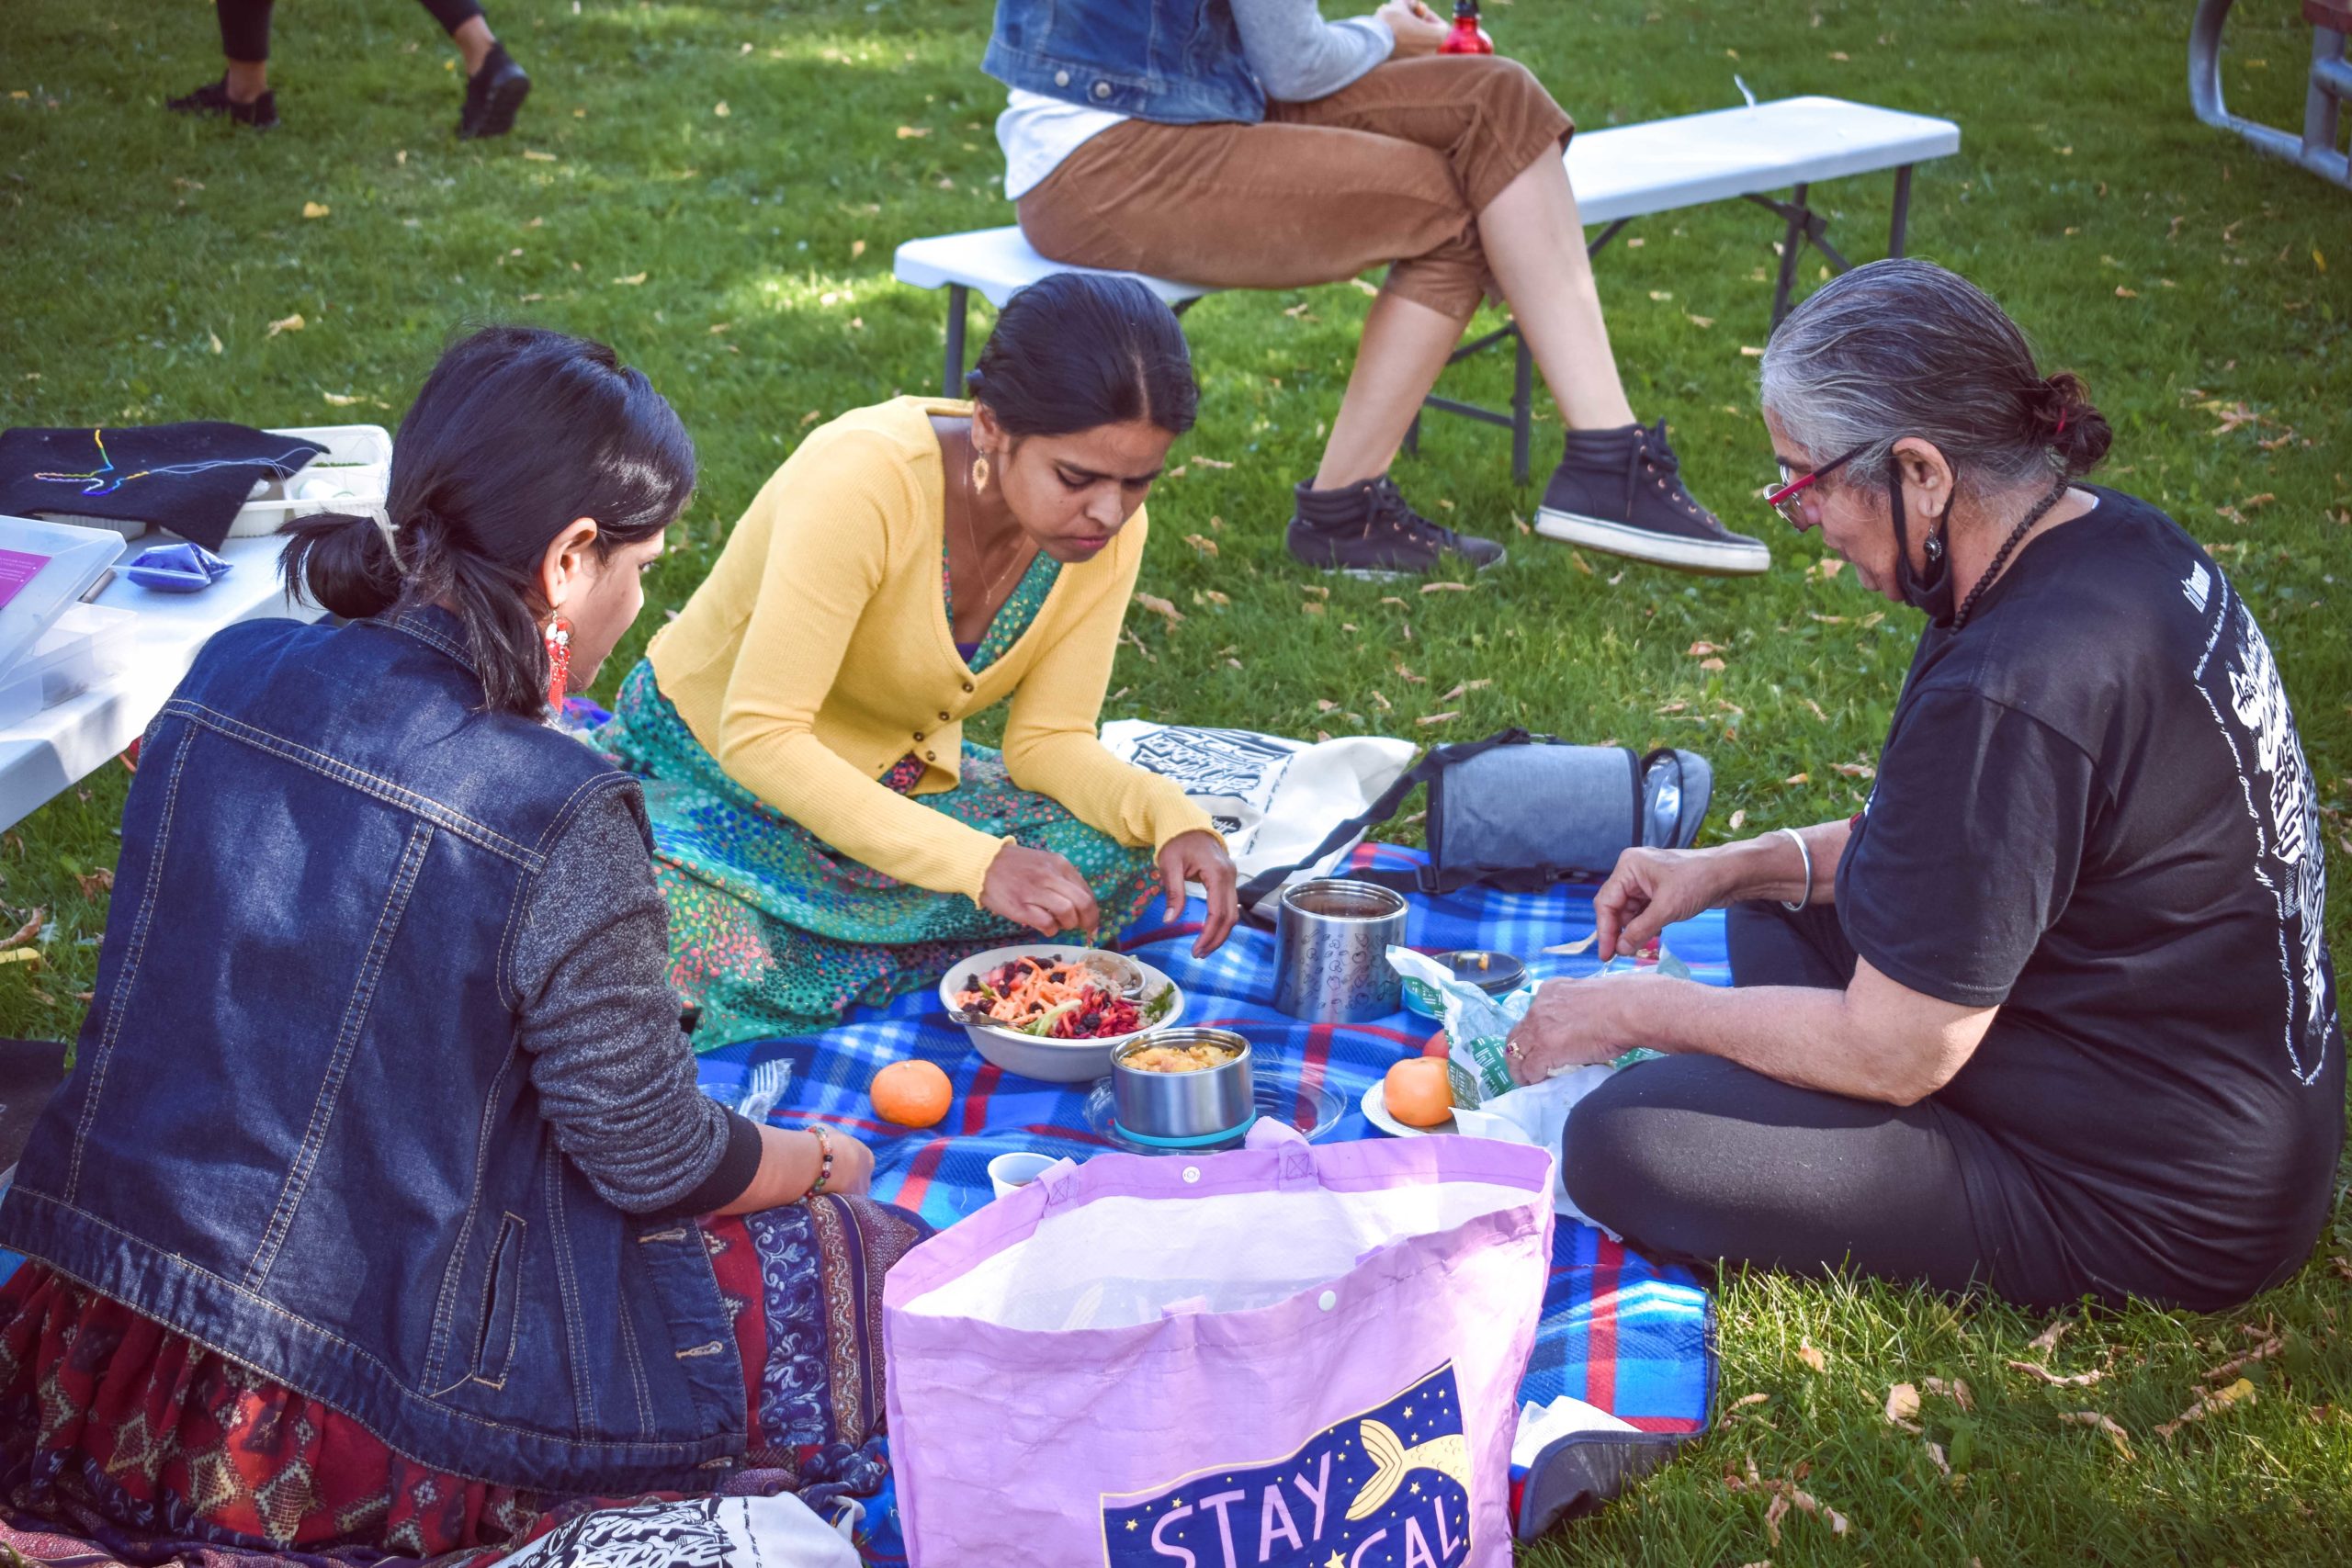 Photo of three community members sitting on a blue & red plaid picnic blanket sharing food. In the background, there is a person sitting on a bench and people walking on the grass.